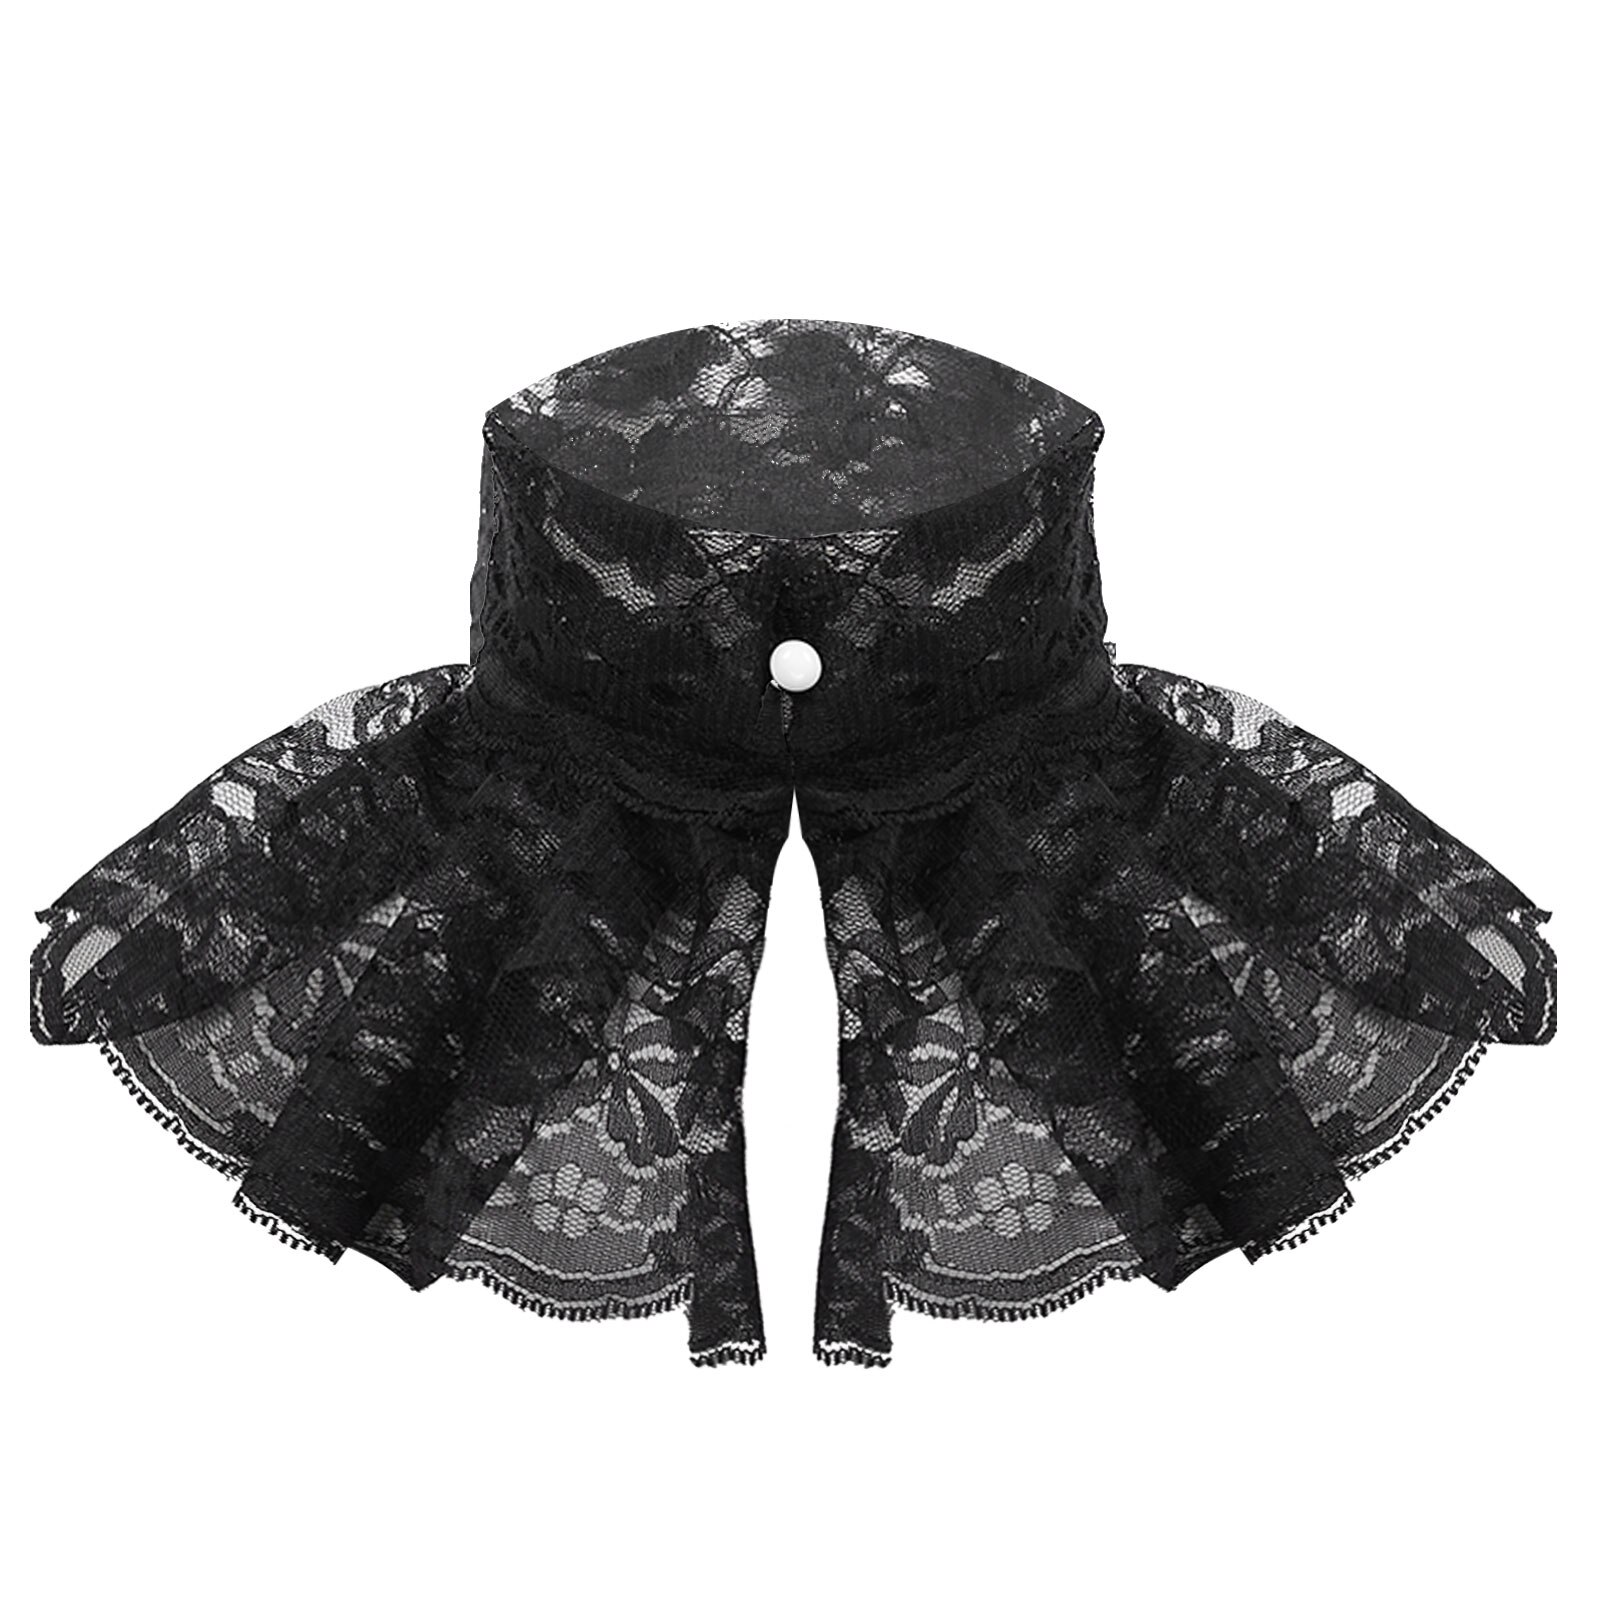 Women Sheer Lace Collar Victorian Renaissance Detachable Collar Ruffled Lace High Neck Collar Stage Party Shirt Dress Costume: Black